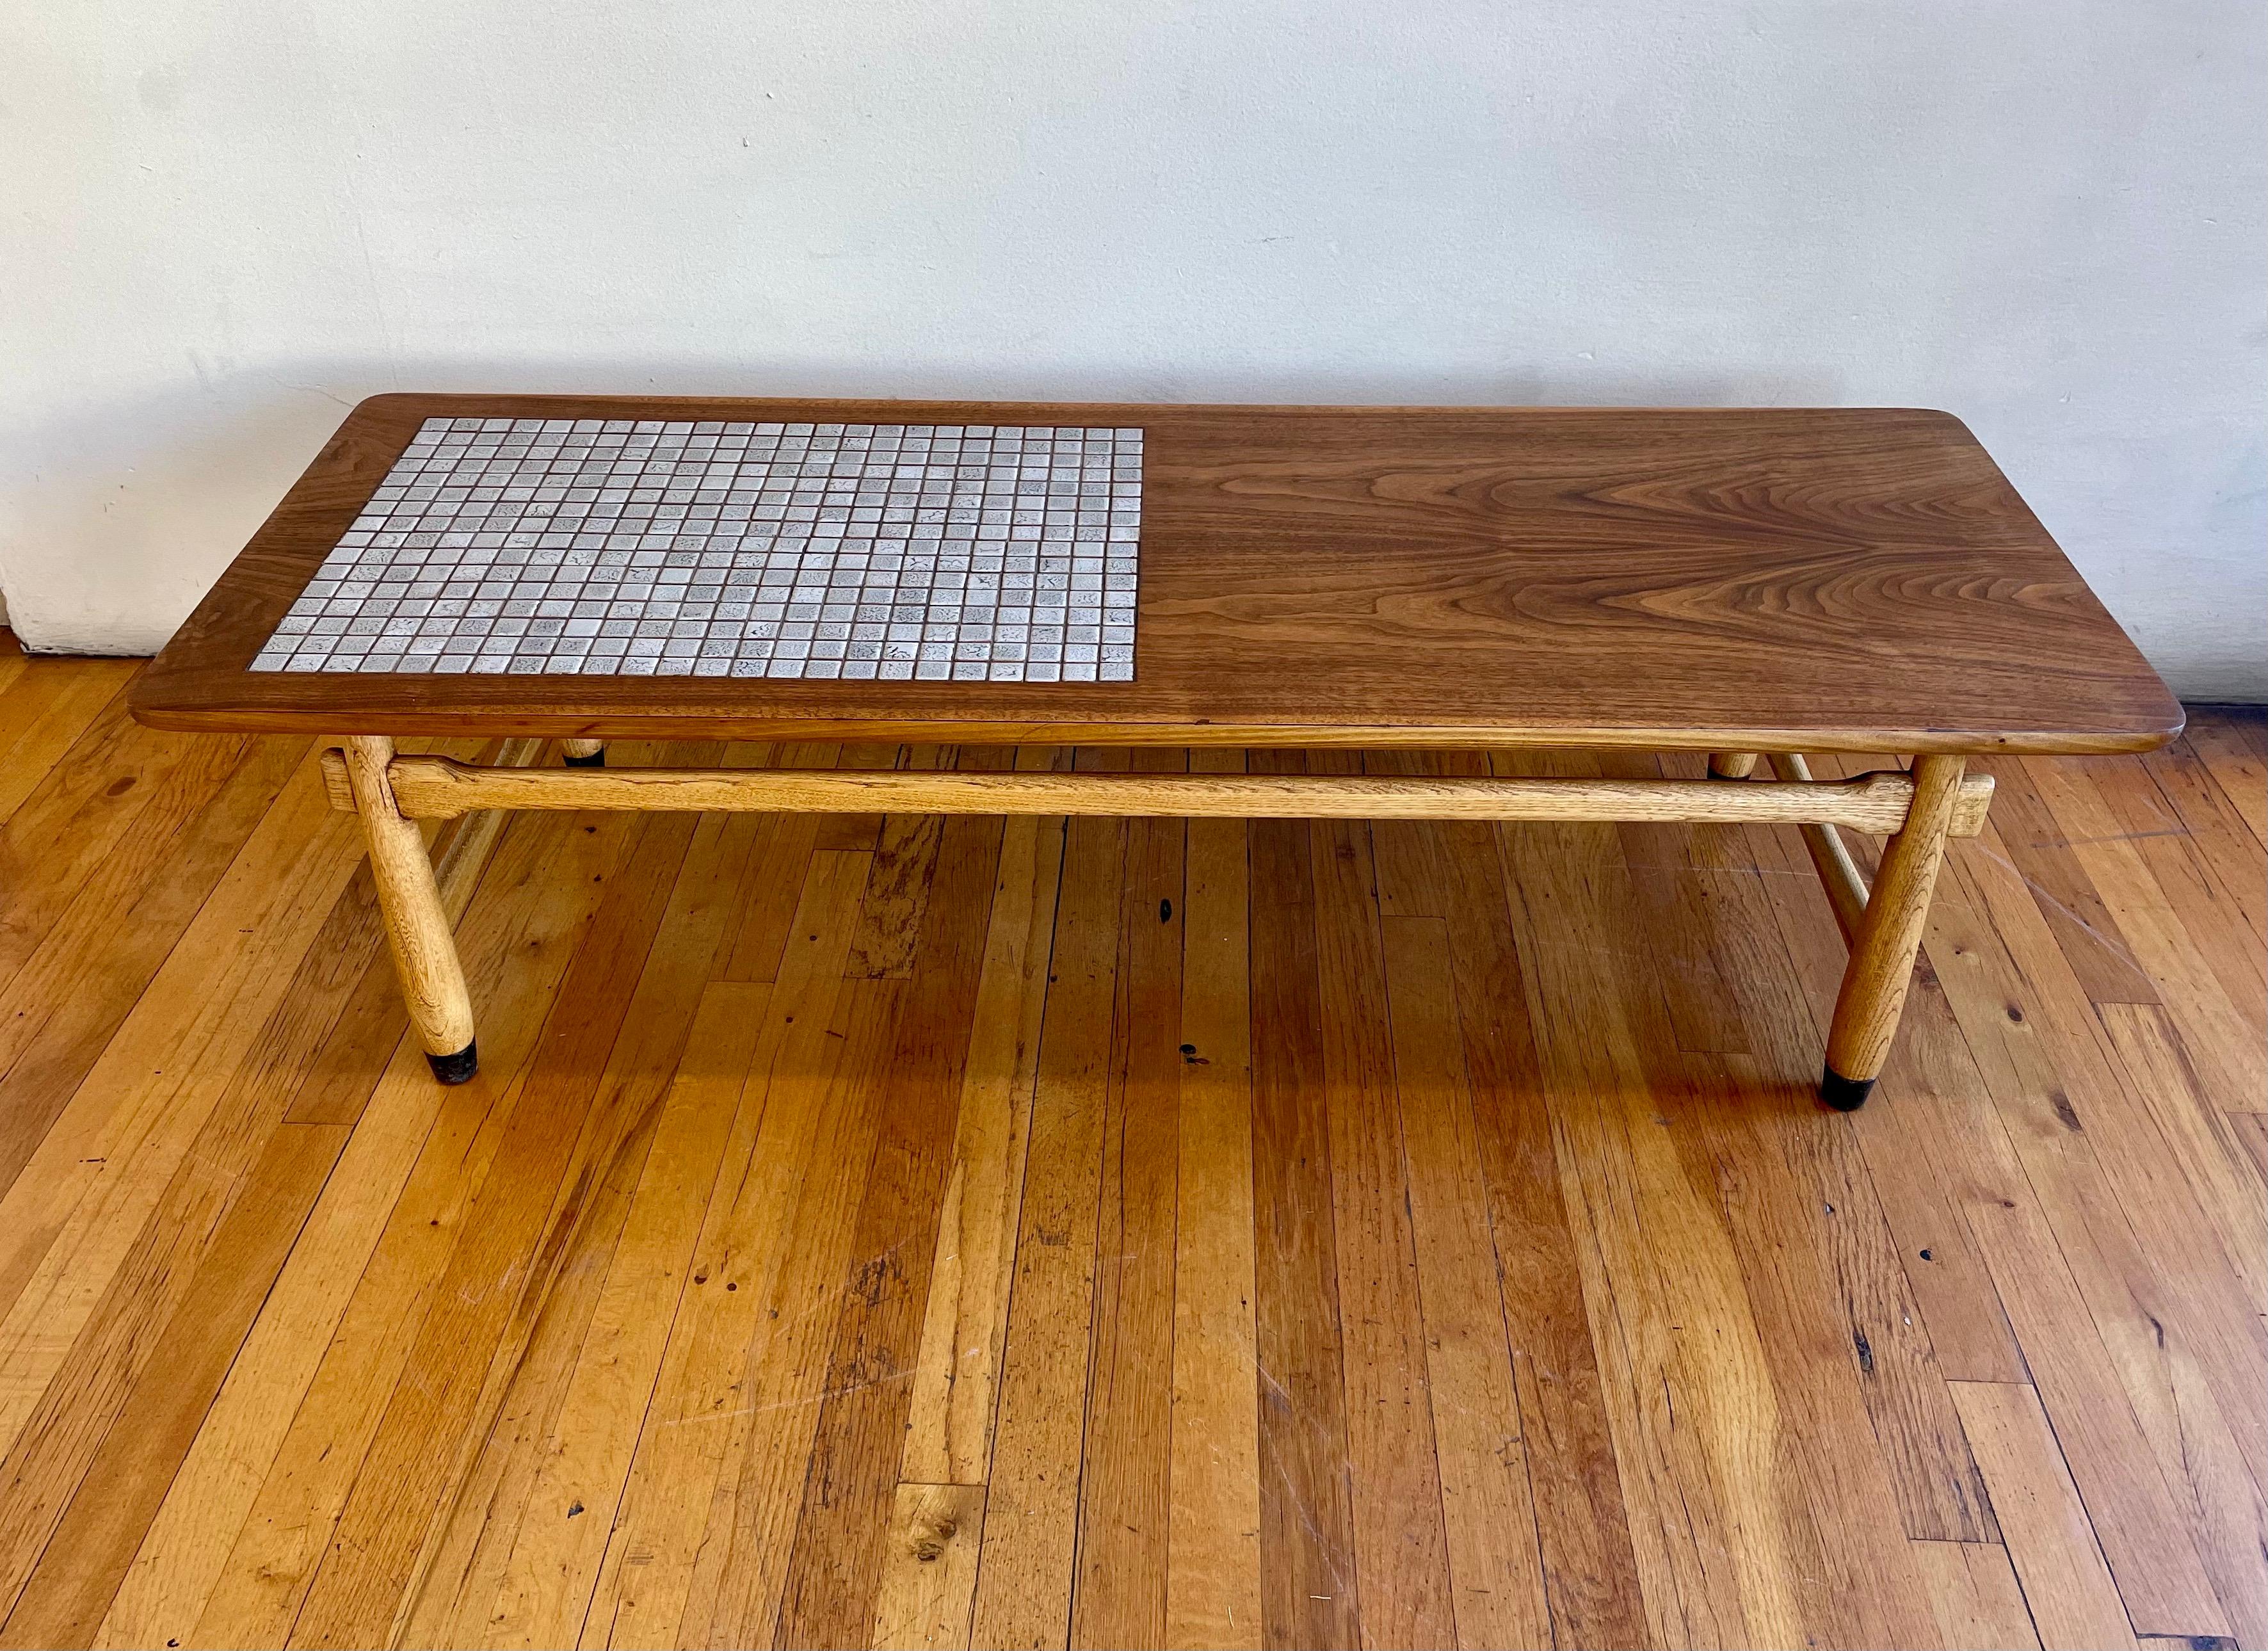 North American 1950s American Modern Walnut Coffee Table with Insert Tile Atomic Design